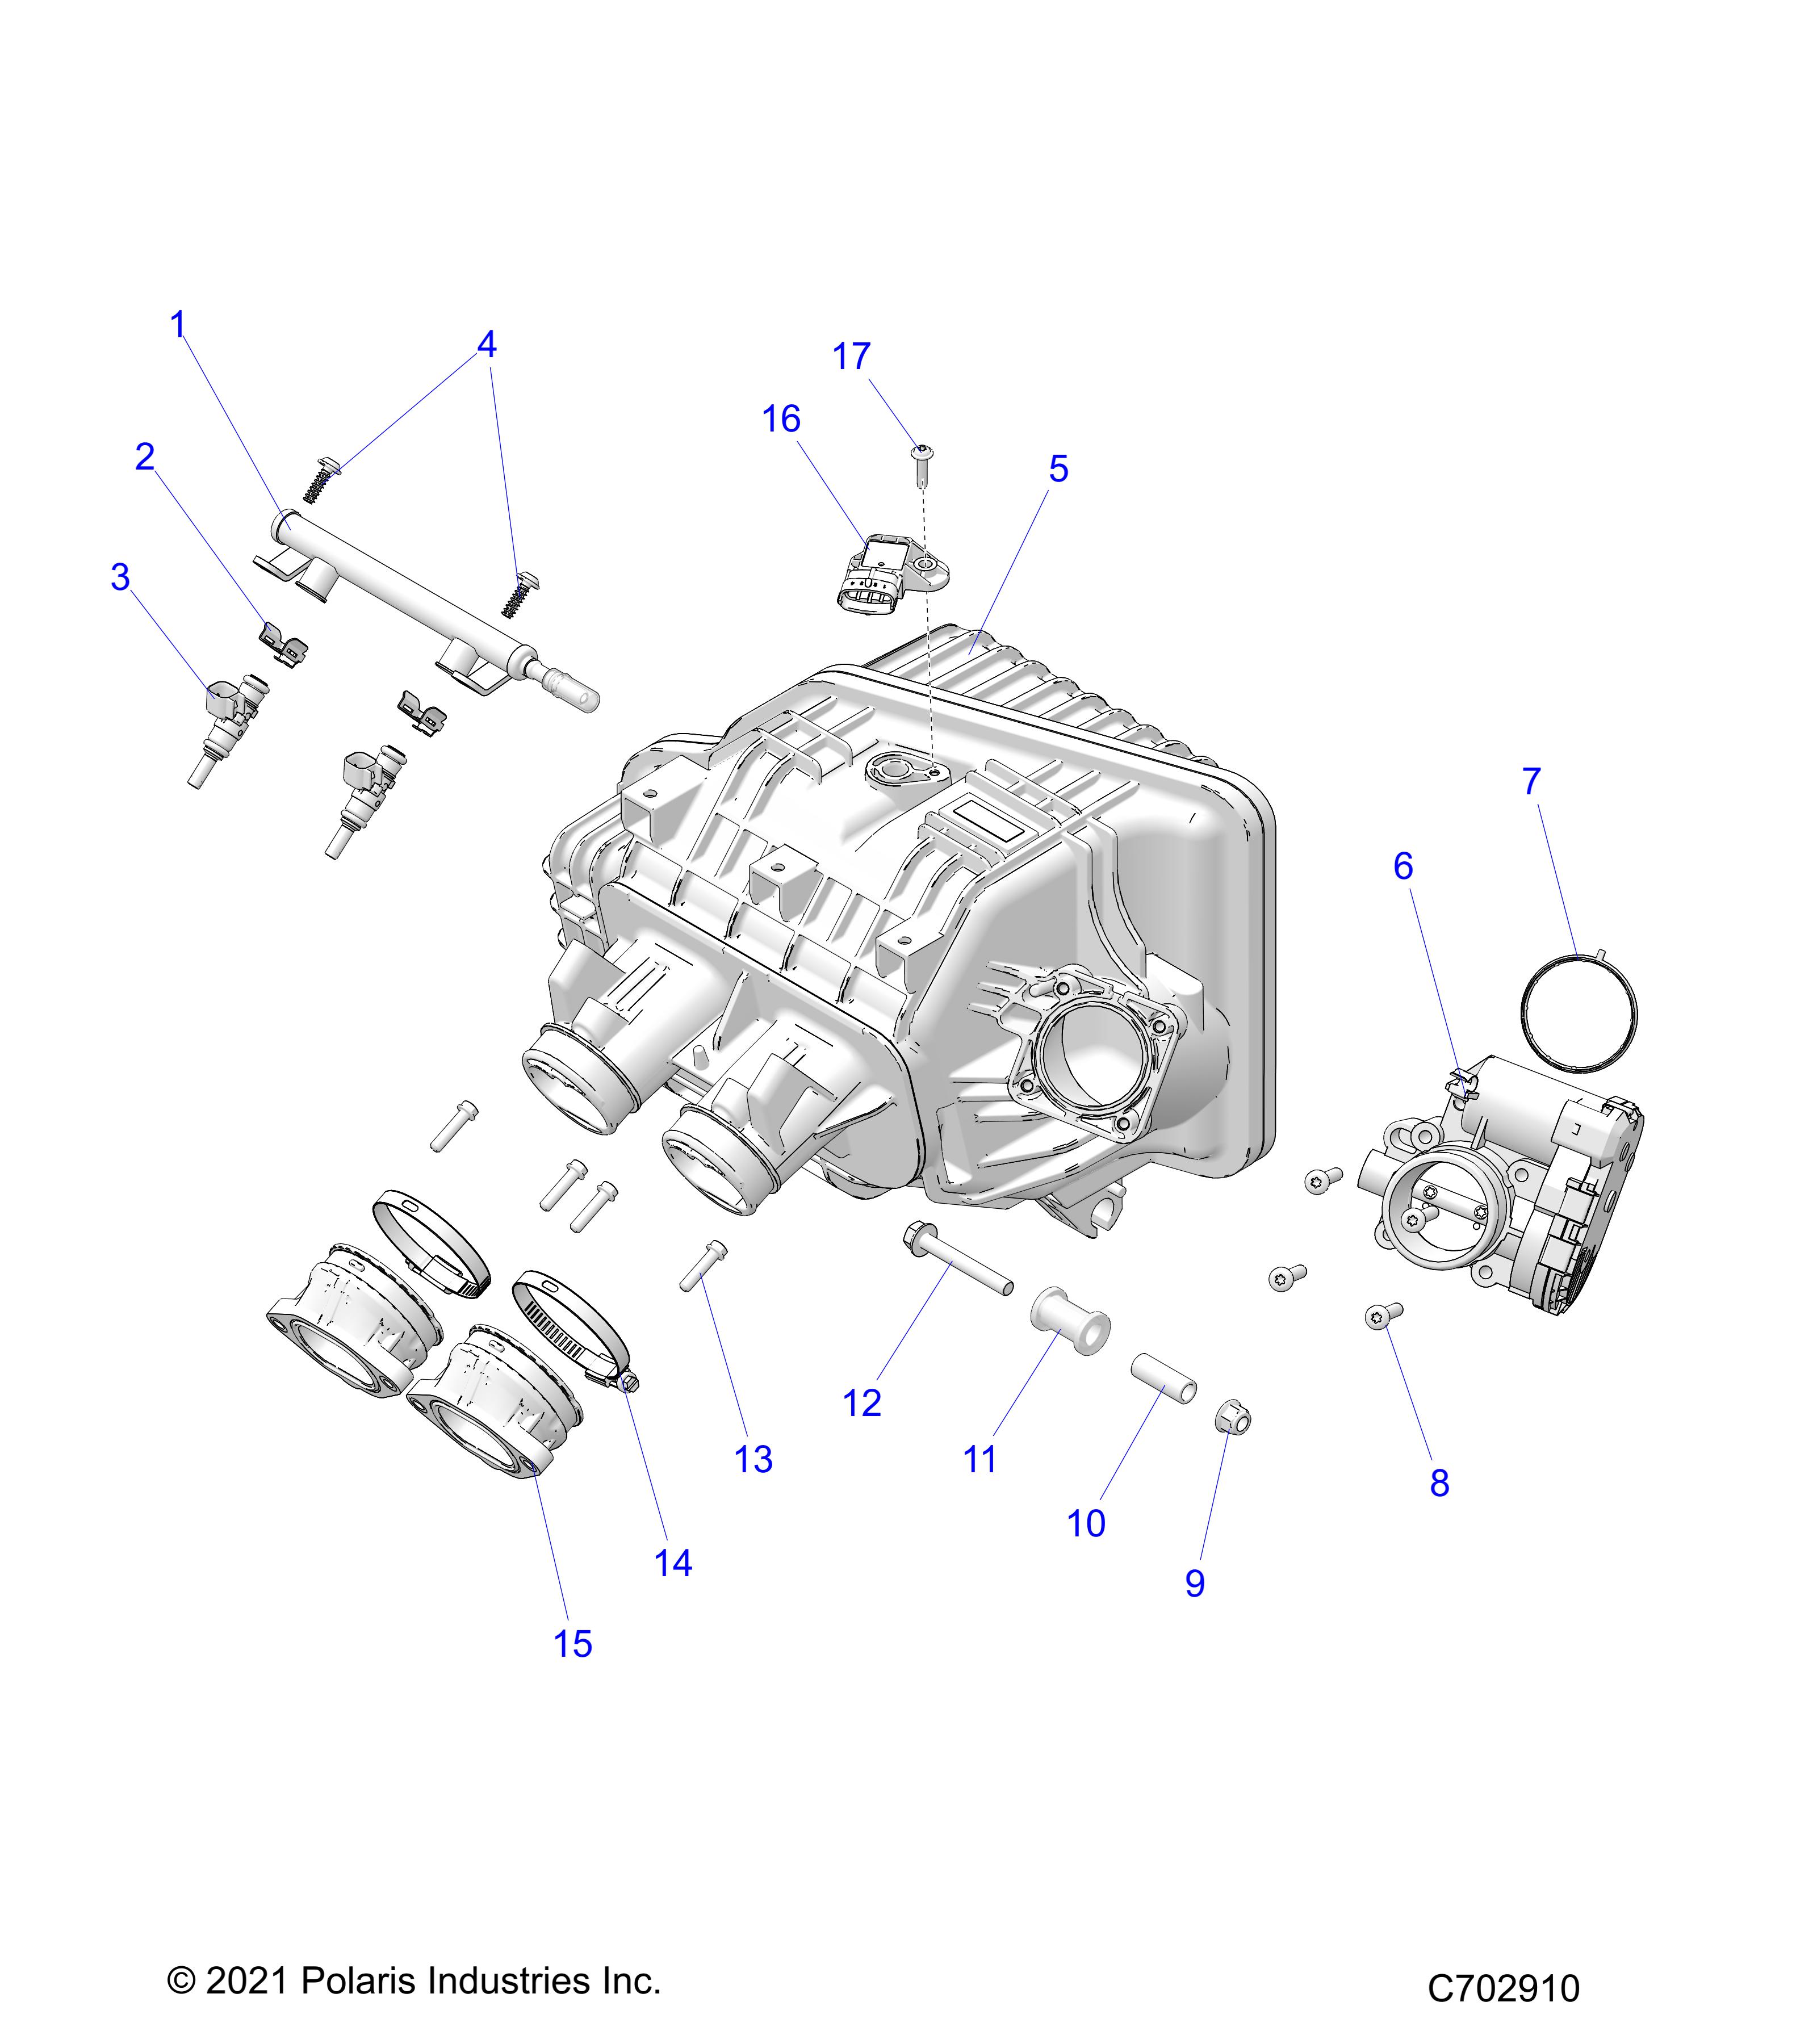 Part Number : 3023683 MANIFOLD-INTAKE COMPOSITE